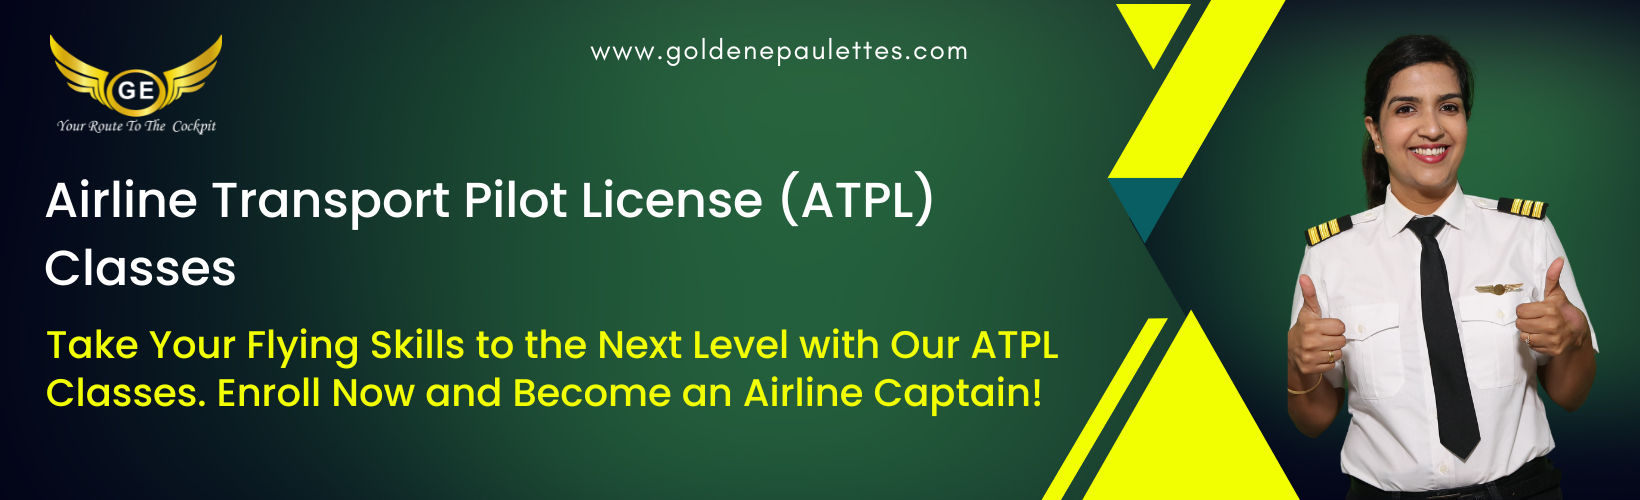 Join Golden Epaulettes Aviation for Expert Career Guidance and Obtain Your Commercial Pilot License from DGCA